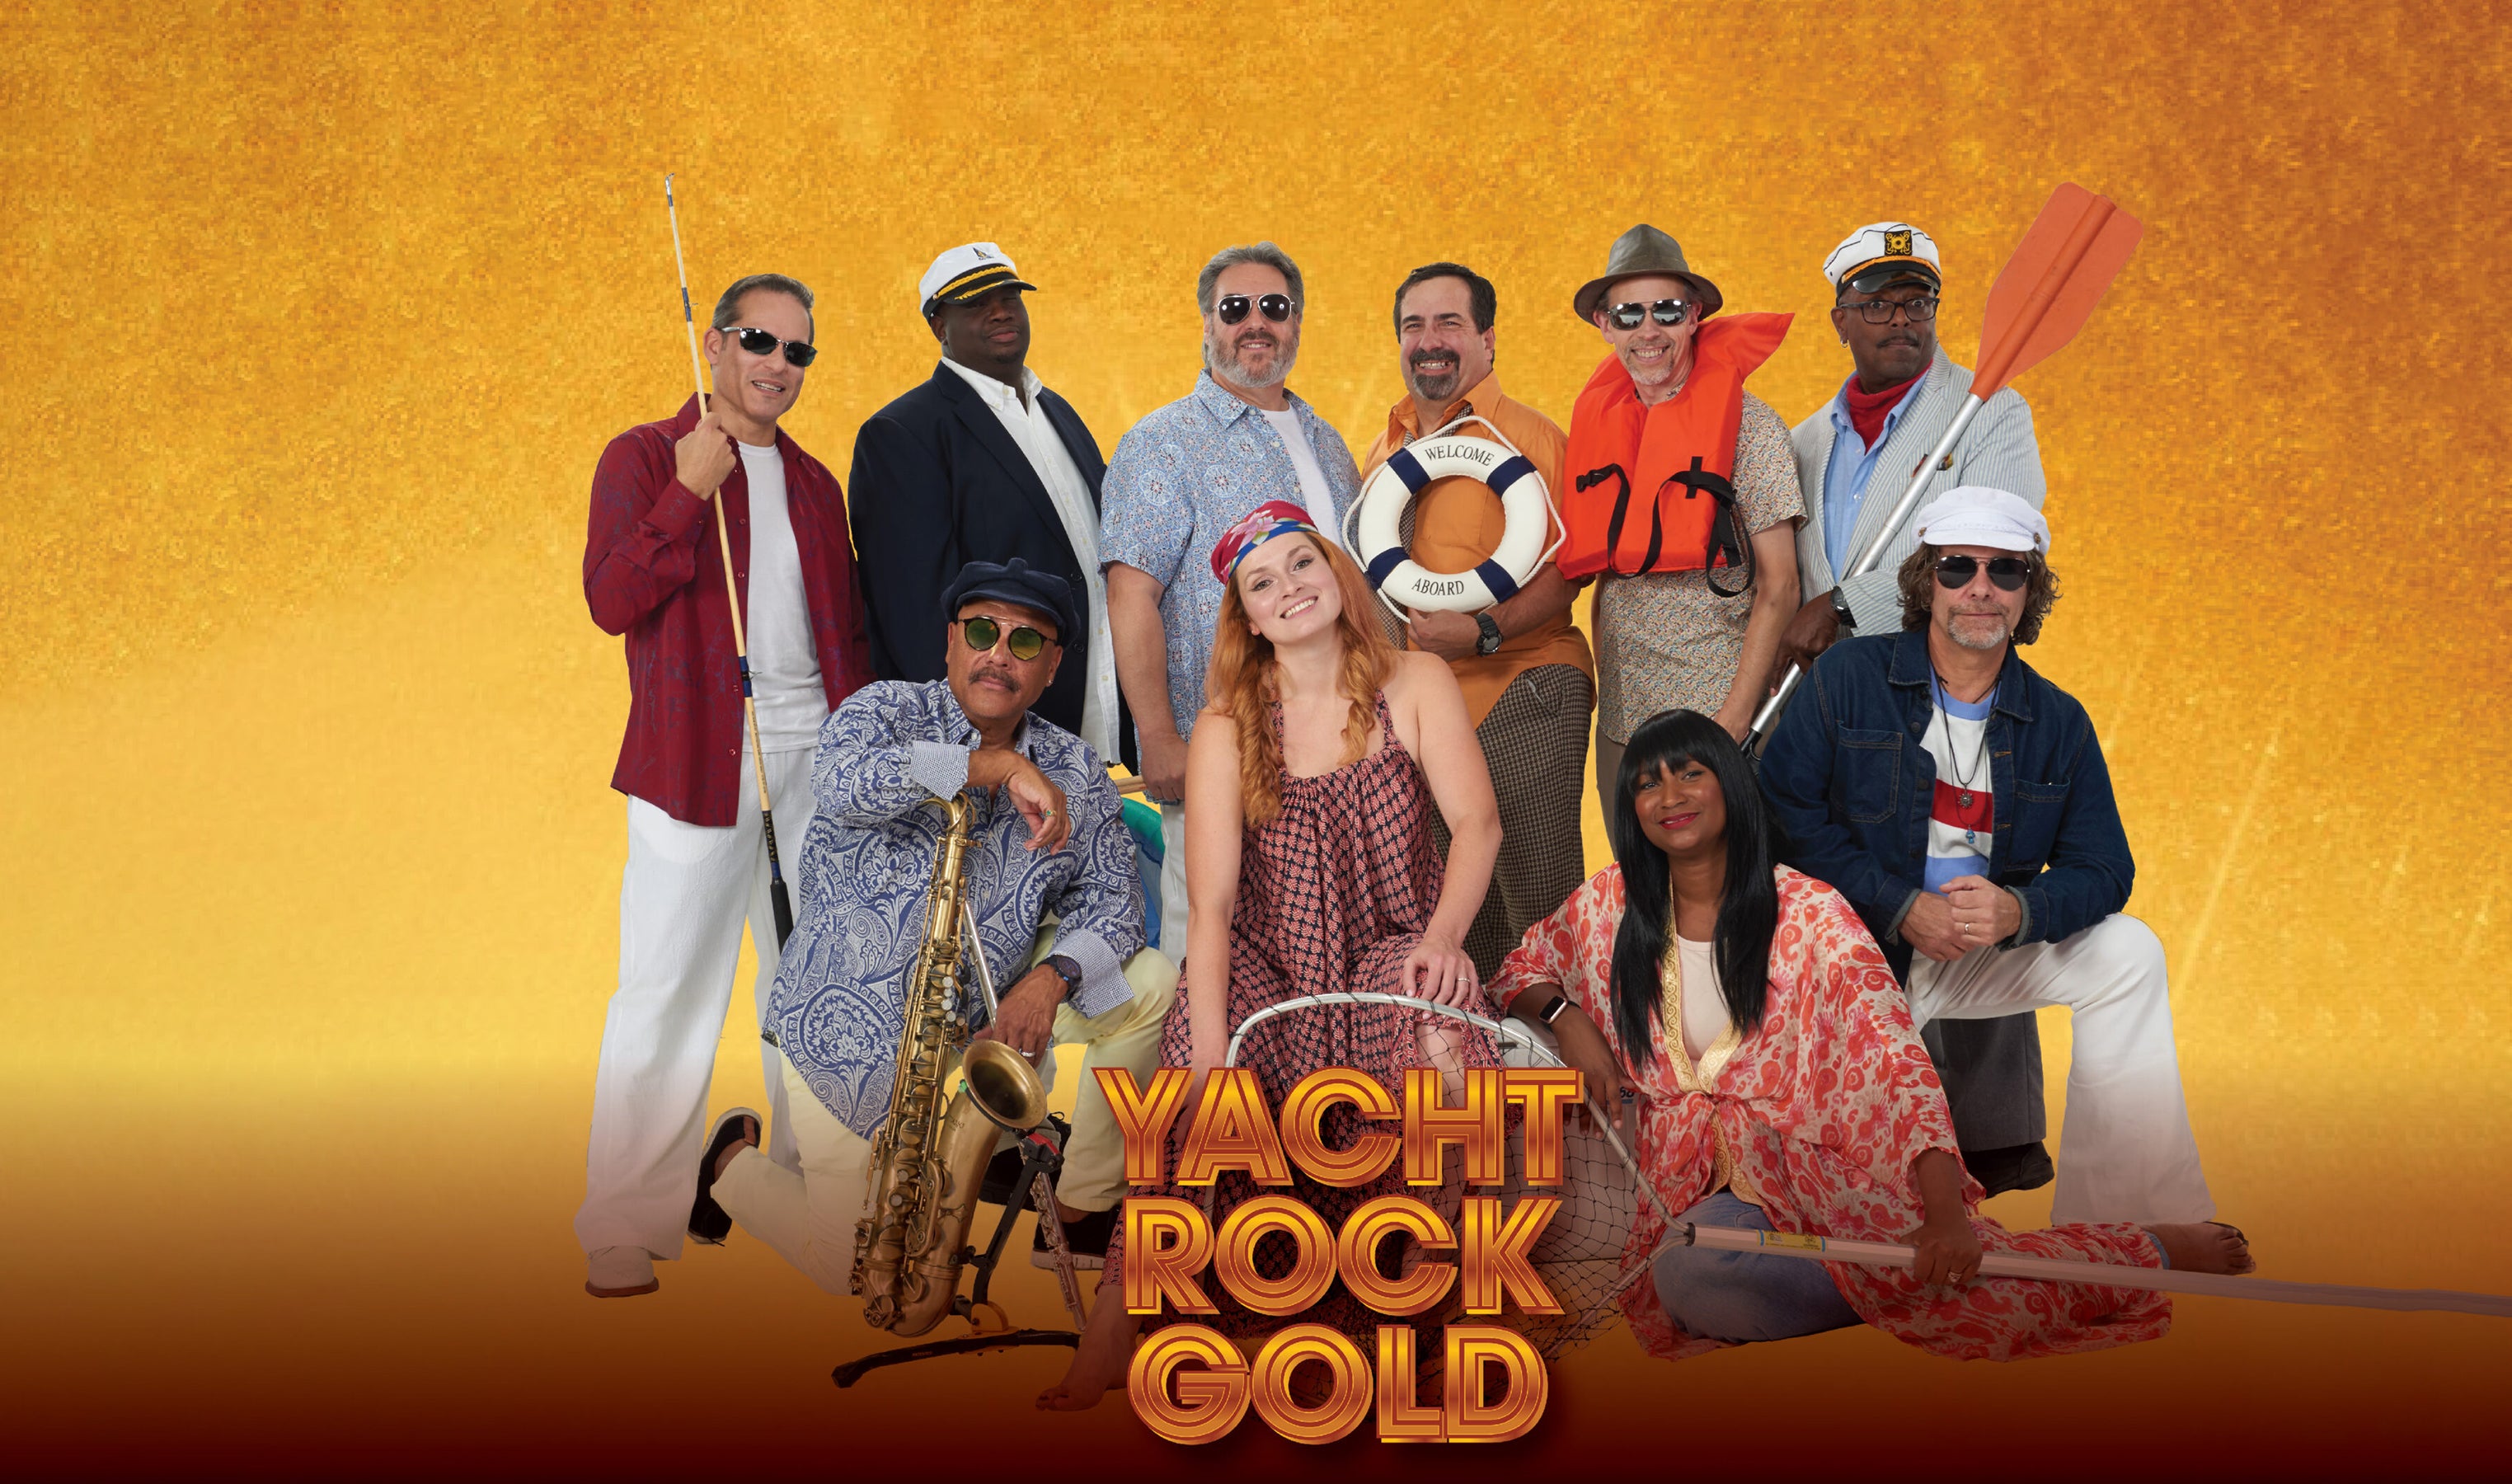 Yacht Rock Gold presale code for advance tickets in Red Bank